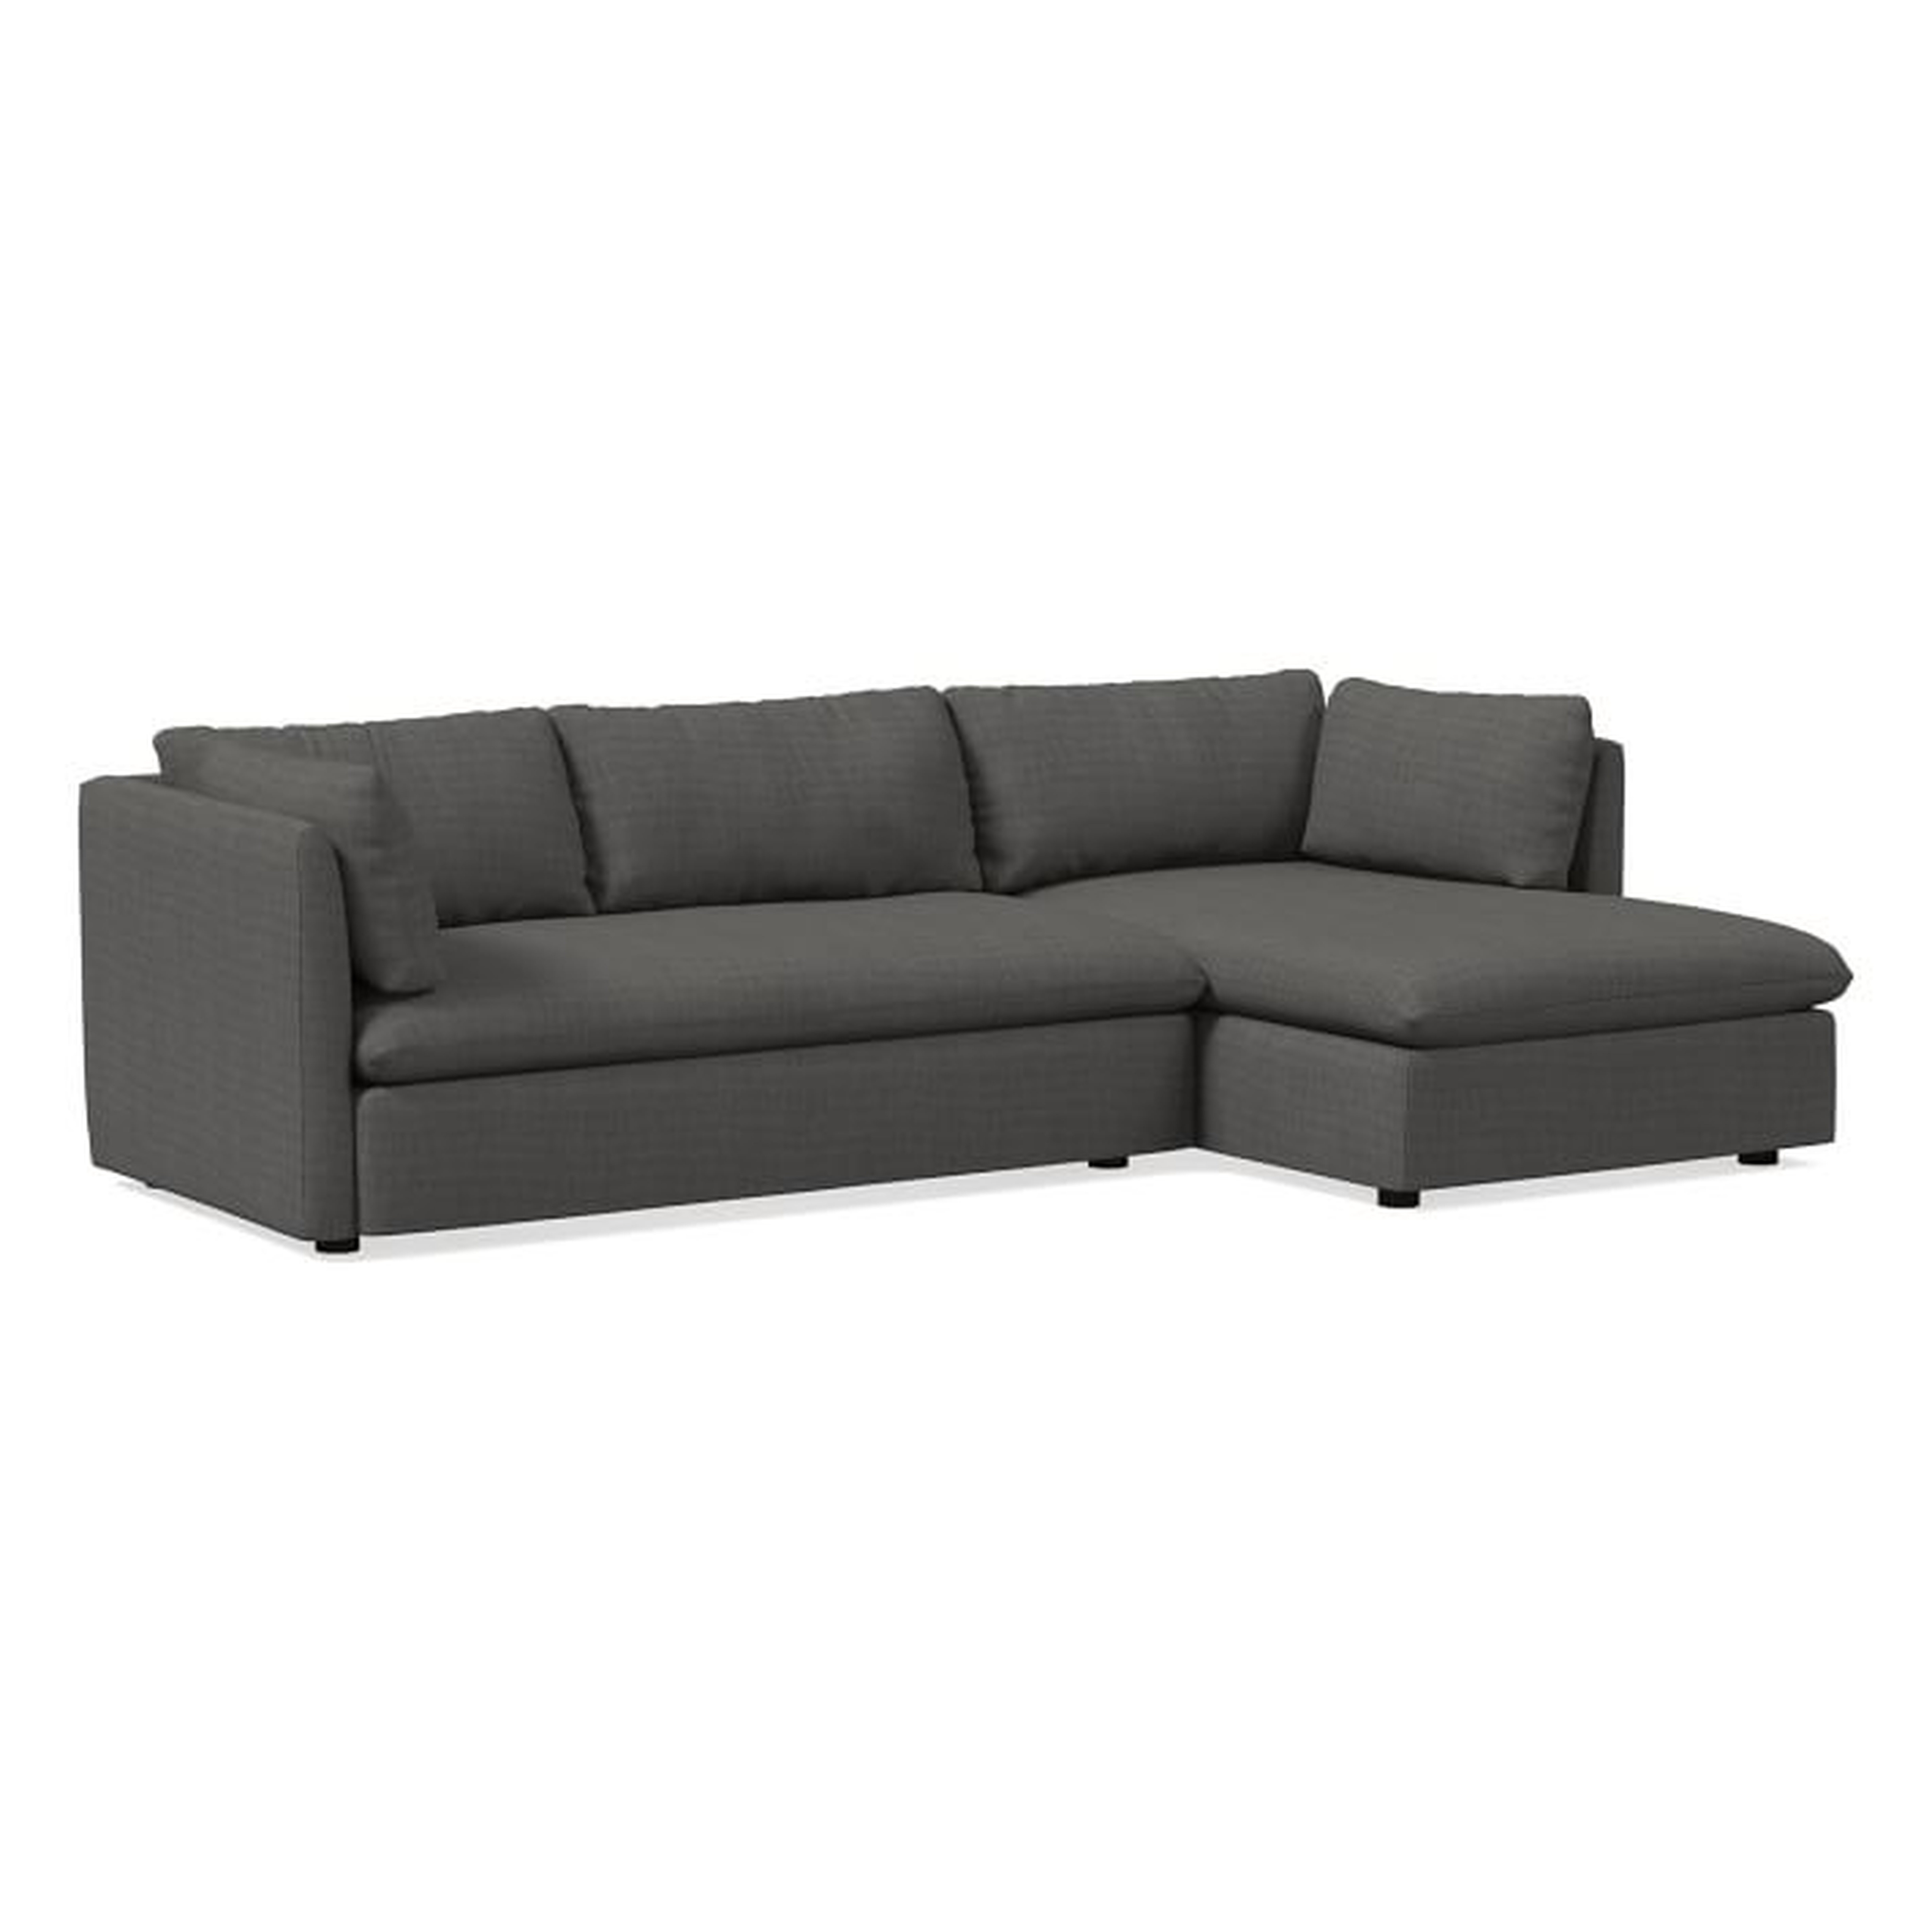 Shelter Sectional Set 04: Left Arm Sofa, Right Arm Chaise, Poly, Performance Basket Slub, Pewter Gray, - West Elm